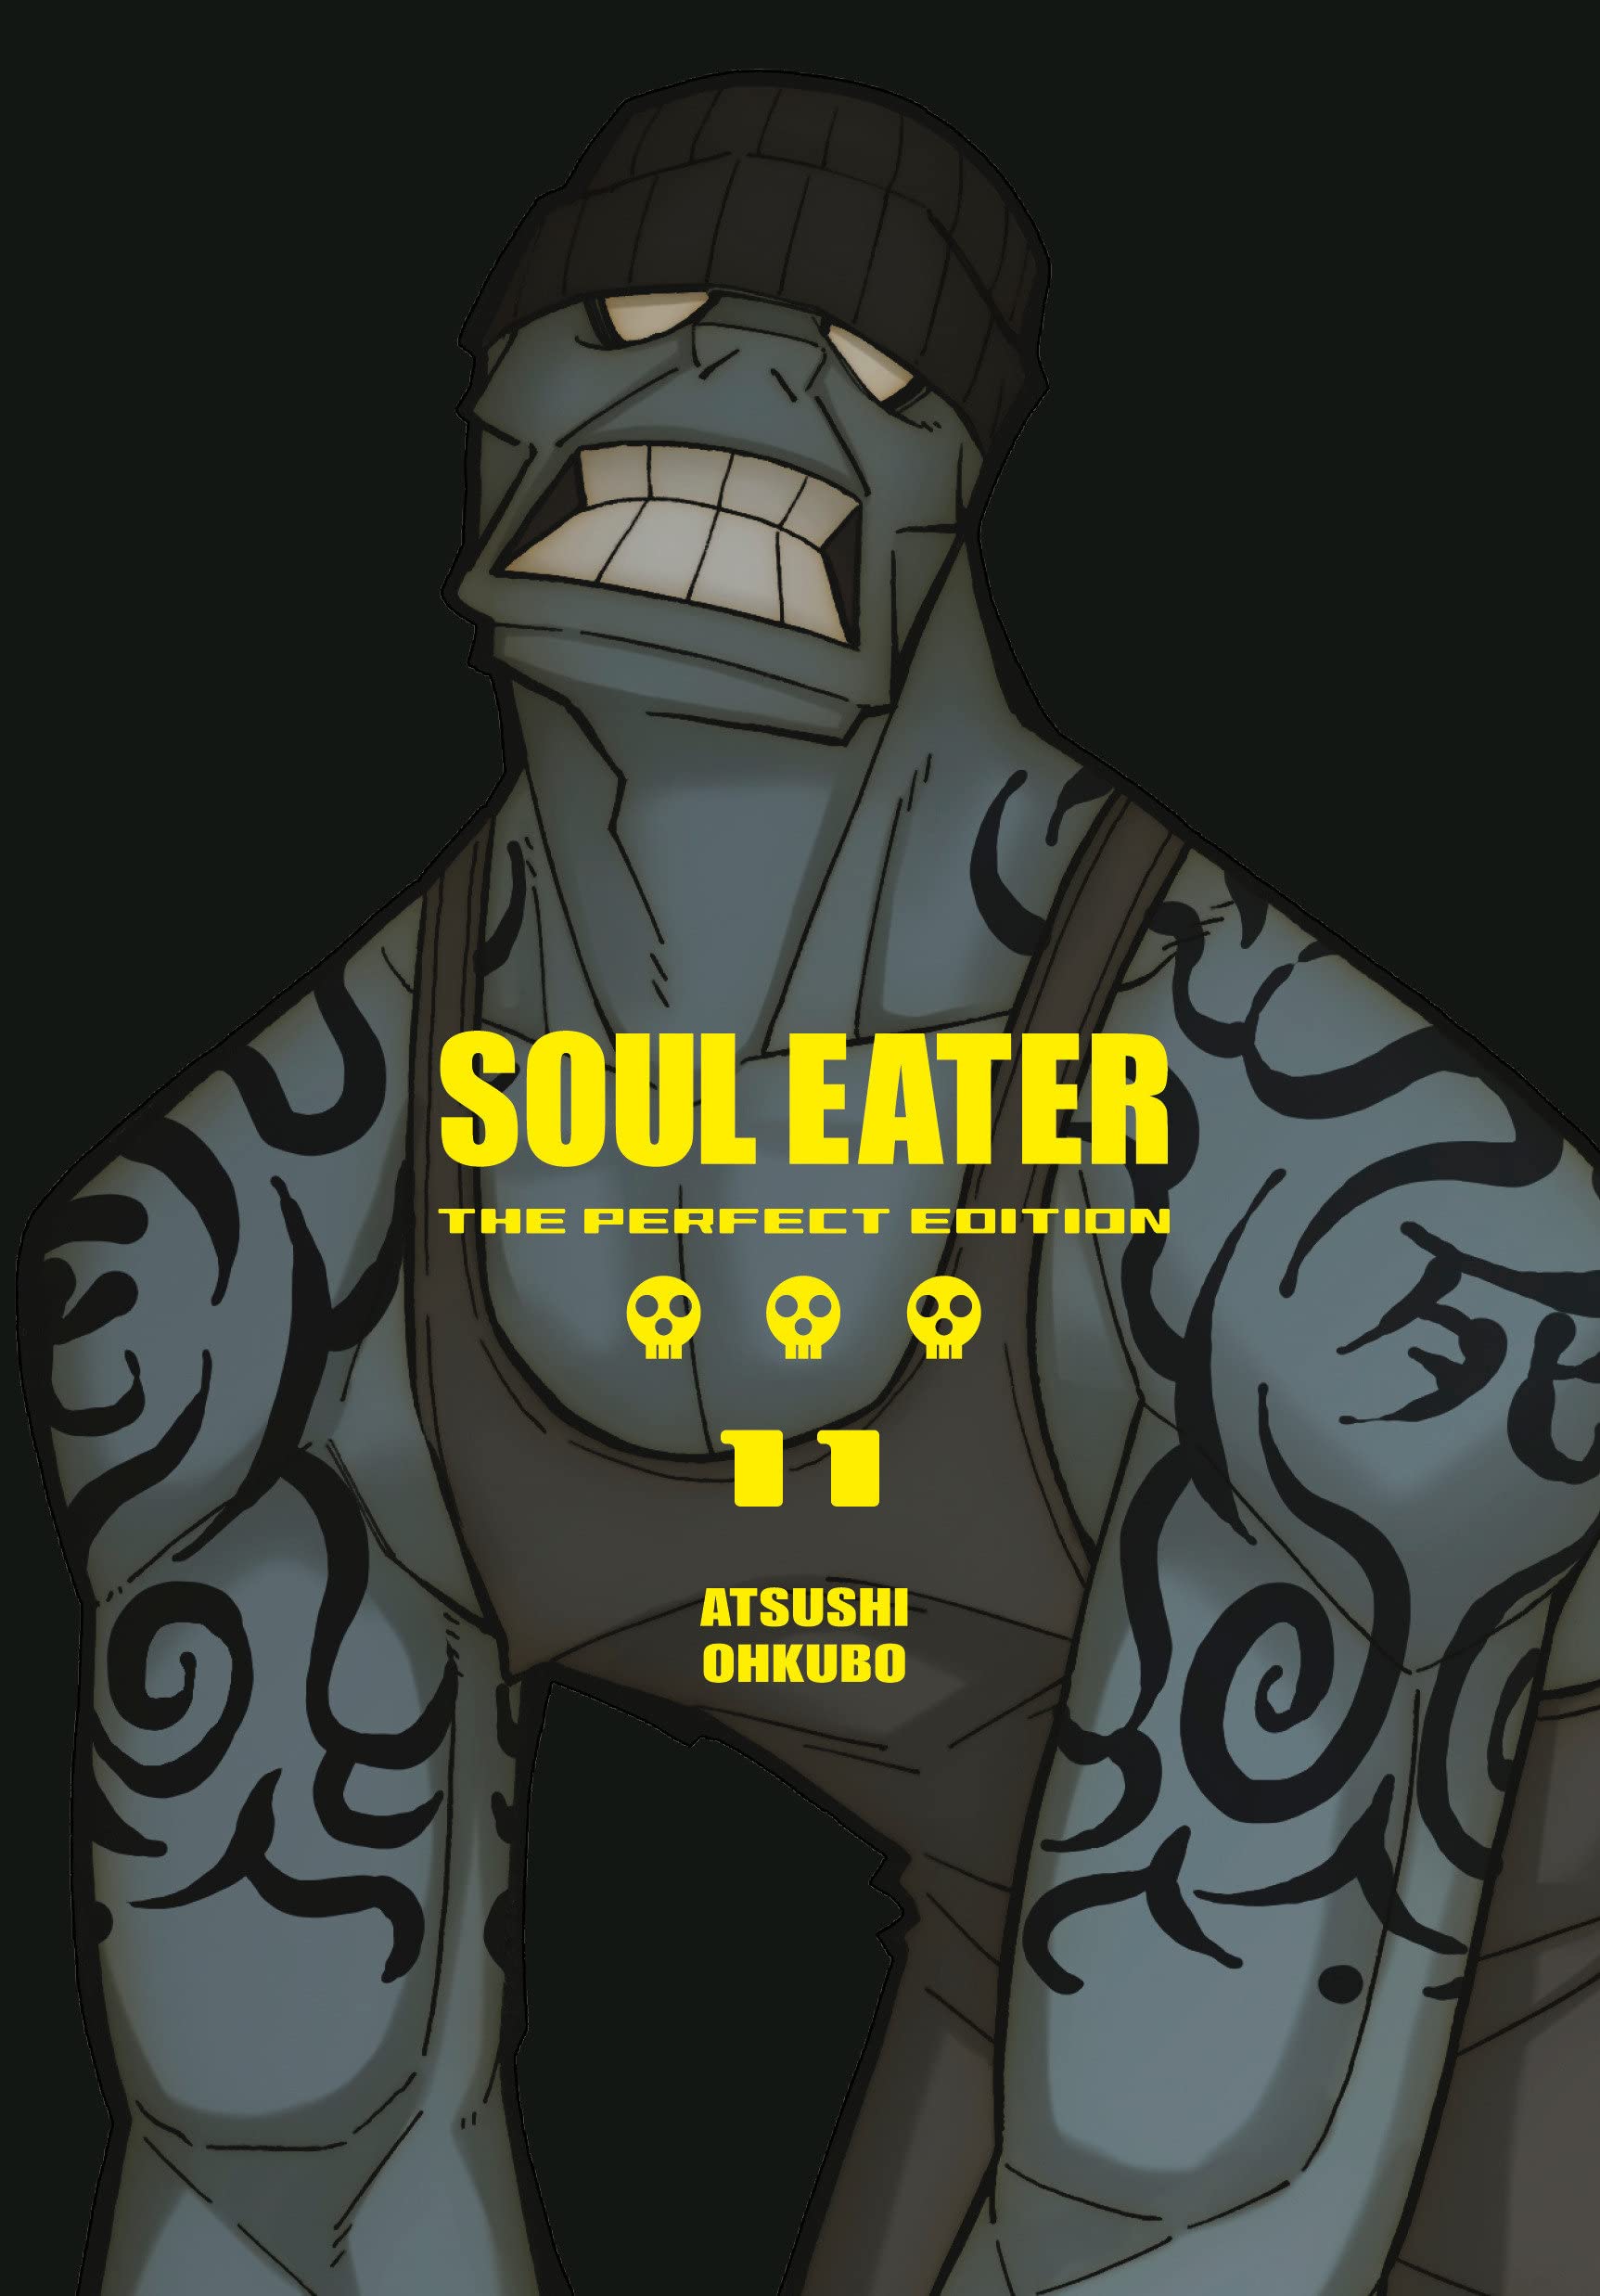 Soul Eater: The Perfect Edition Vol. 11